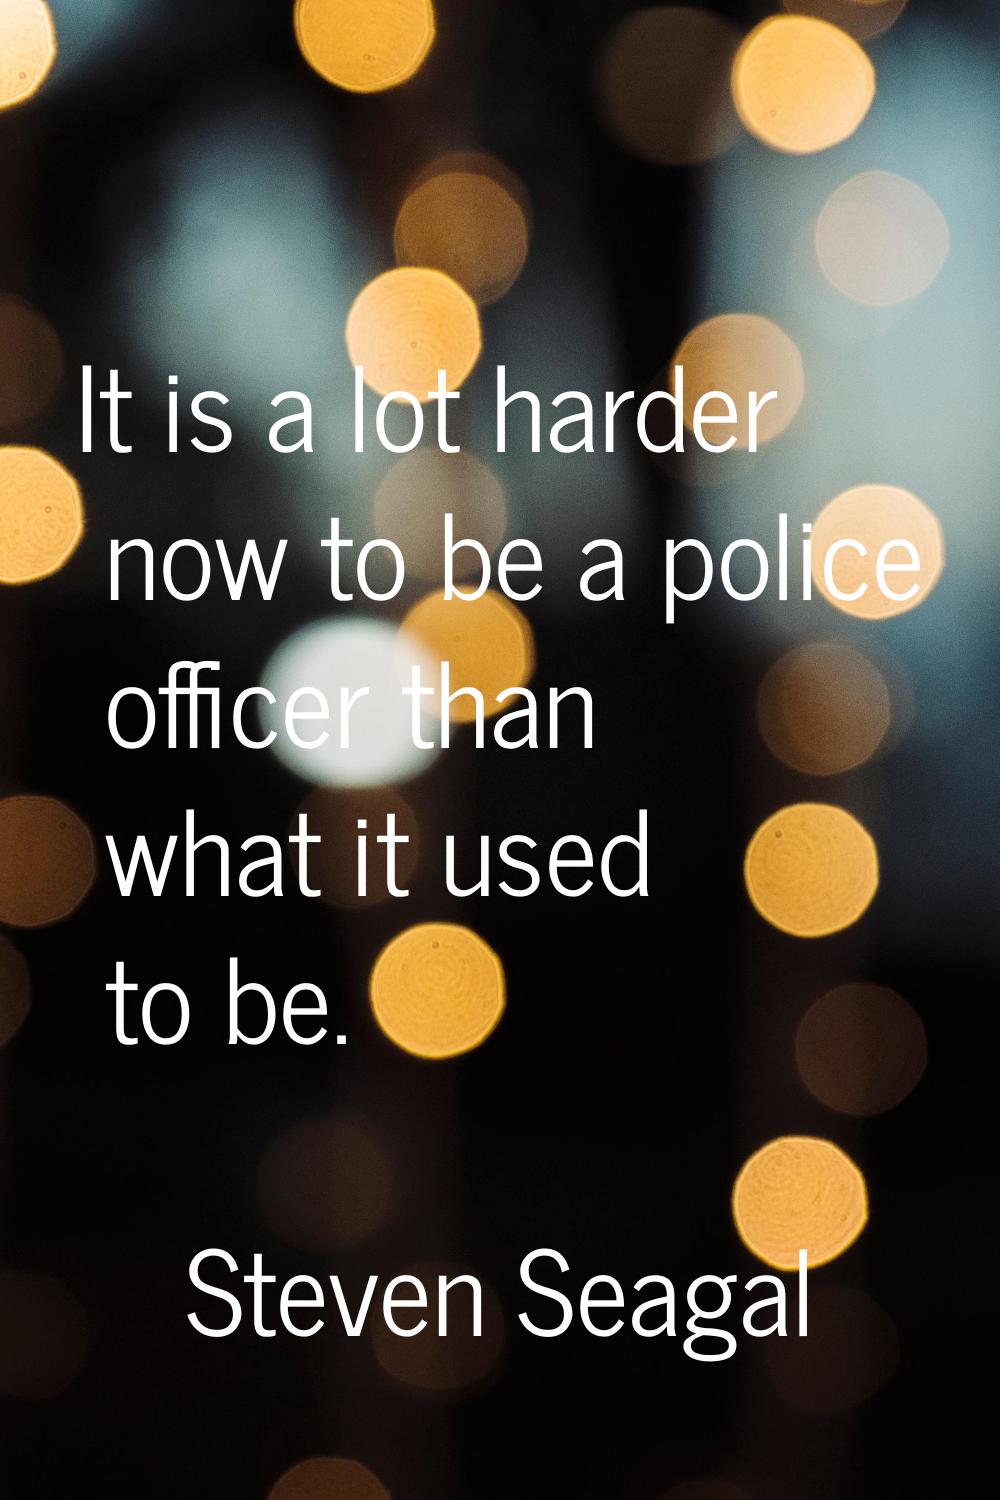 It is a lot harder now to be a police officer than what it used to be.